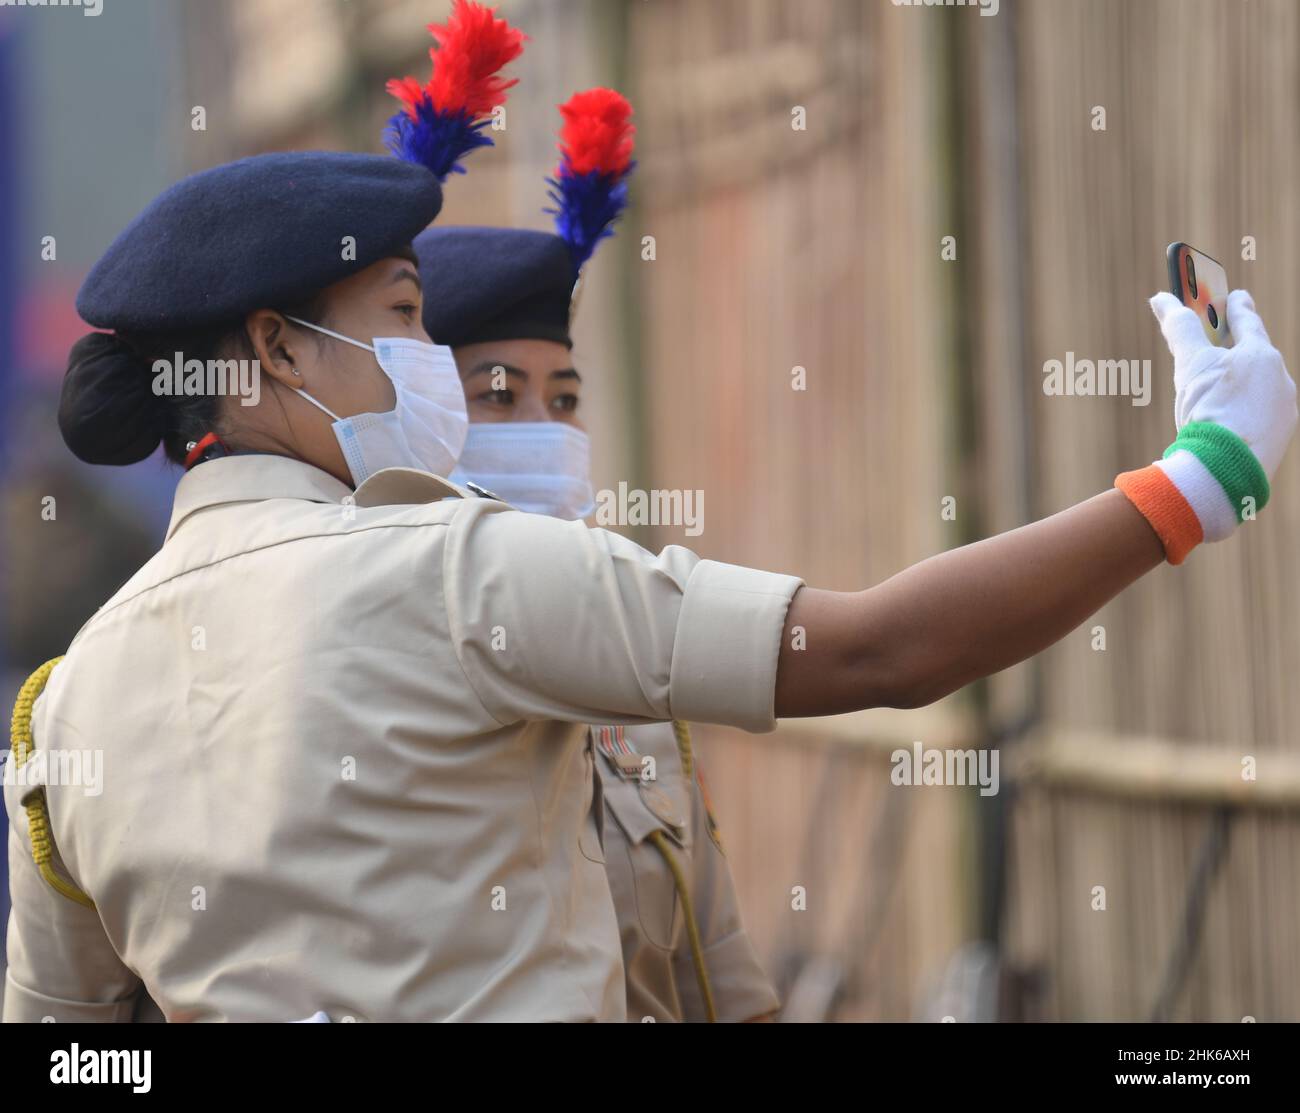 Personnel of different troops are taking photos on the occasion of the 73rd Republic Day celebration at the Assam Rifles ground at Agartala. Tripura, India. Stock Photo